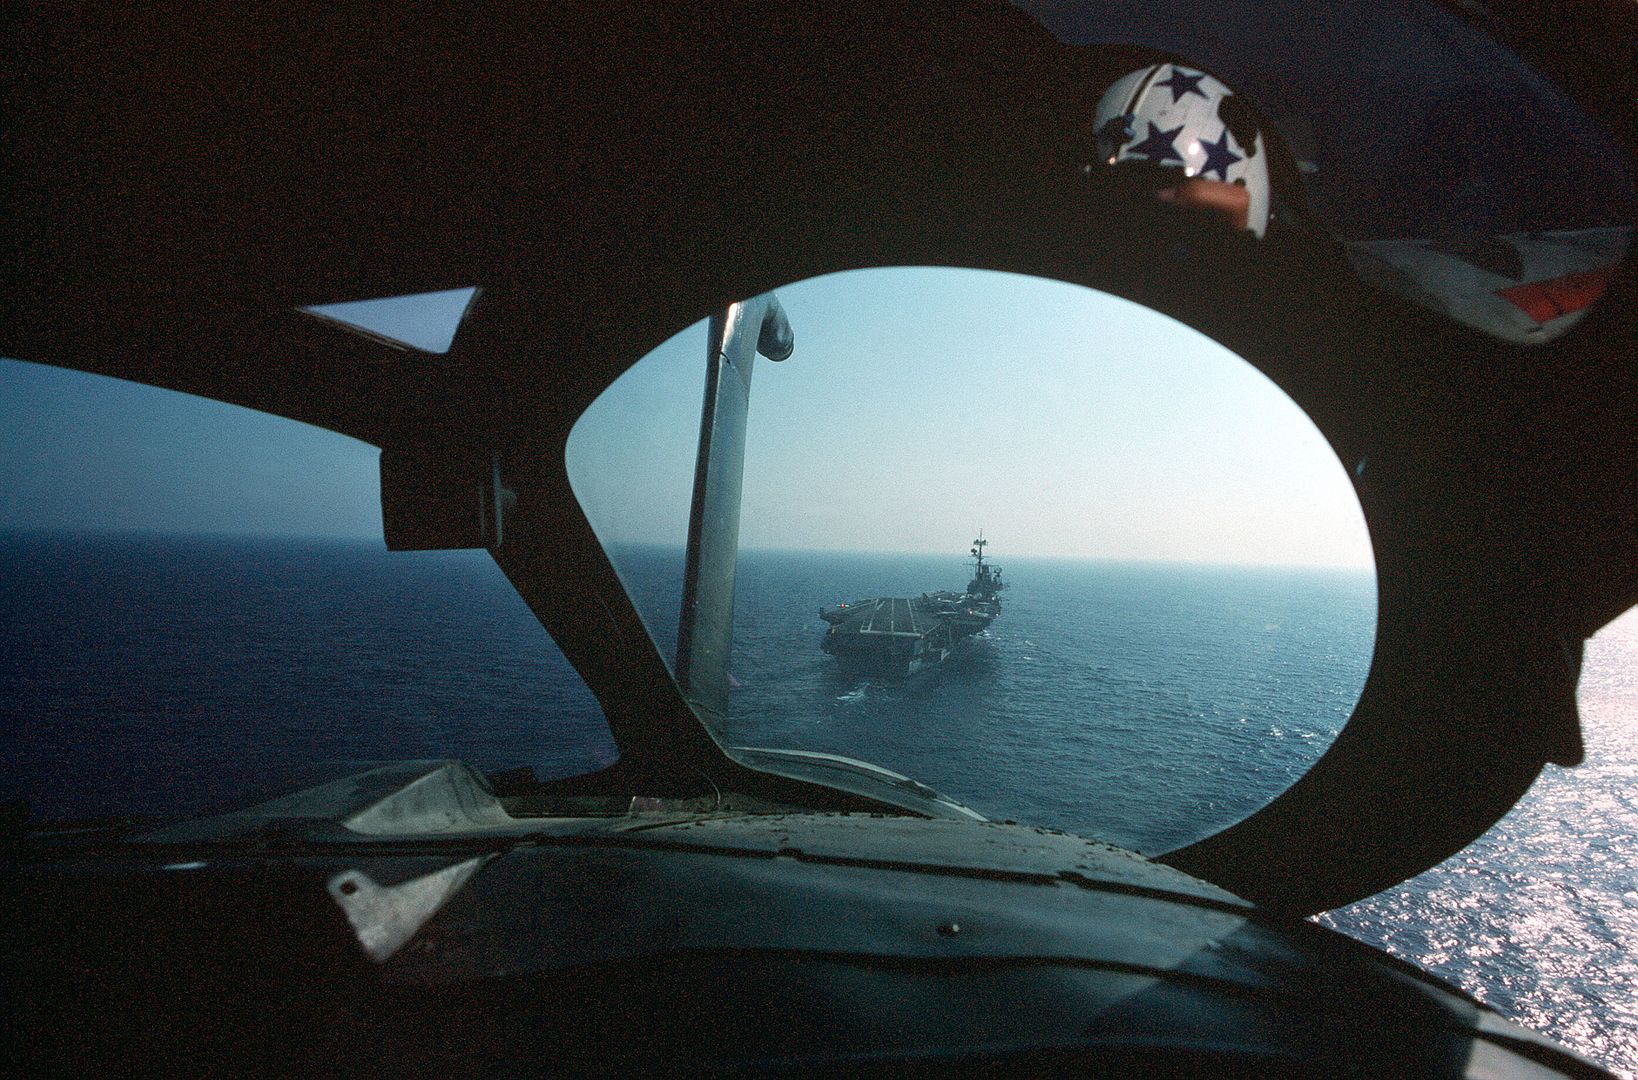 A View From The Cockpit Of An Attack Squadron 176 KA 6D Intruder Aircraft As It Approaches The Stern Of The Aircraft Carrier USS FORRESTAL